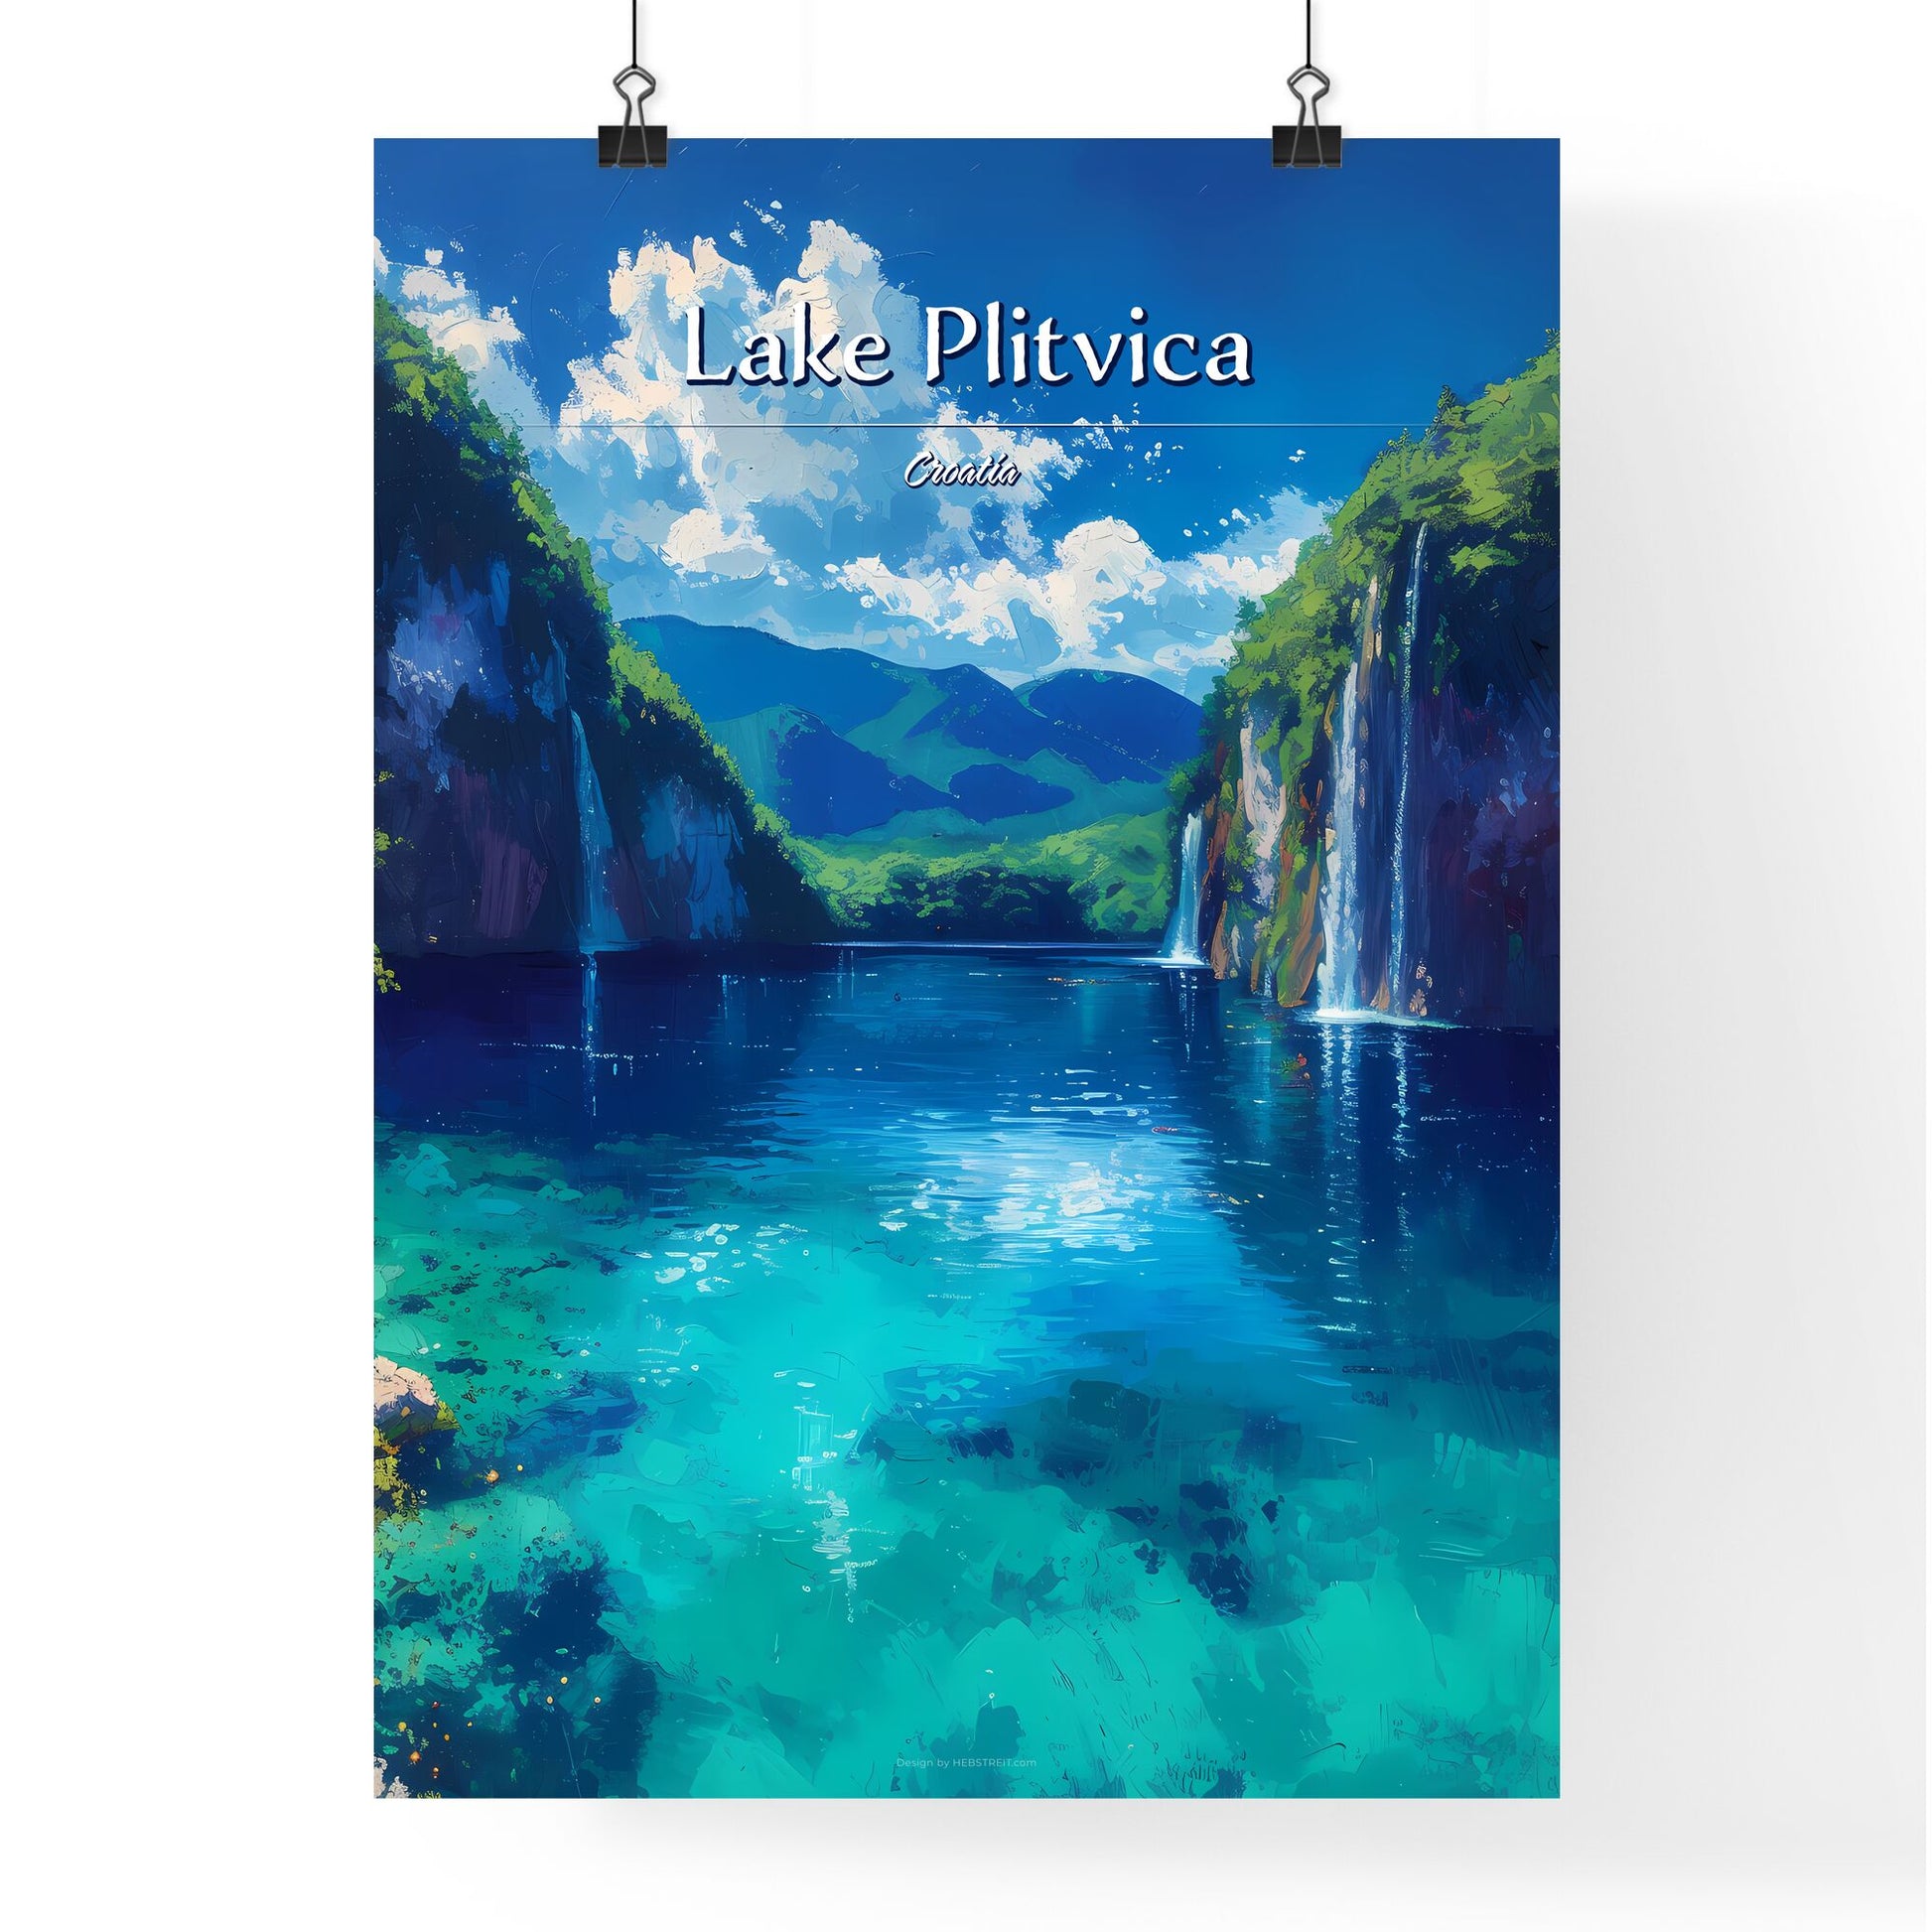 Lake Plitvica, Croatia - Art print of a woman with red bow and freckles Default Title